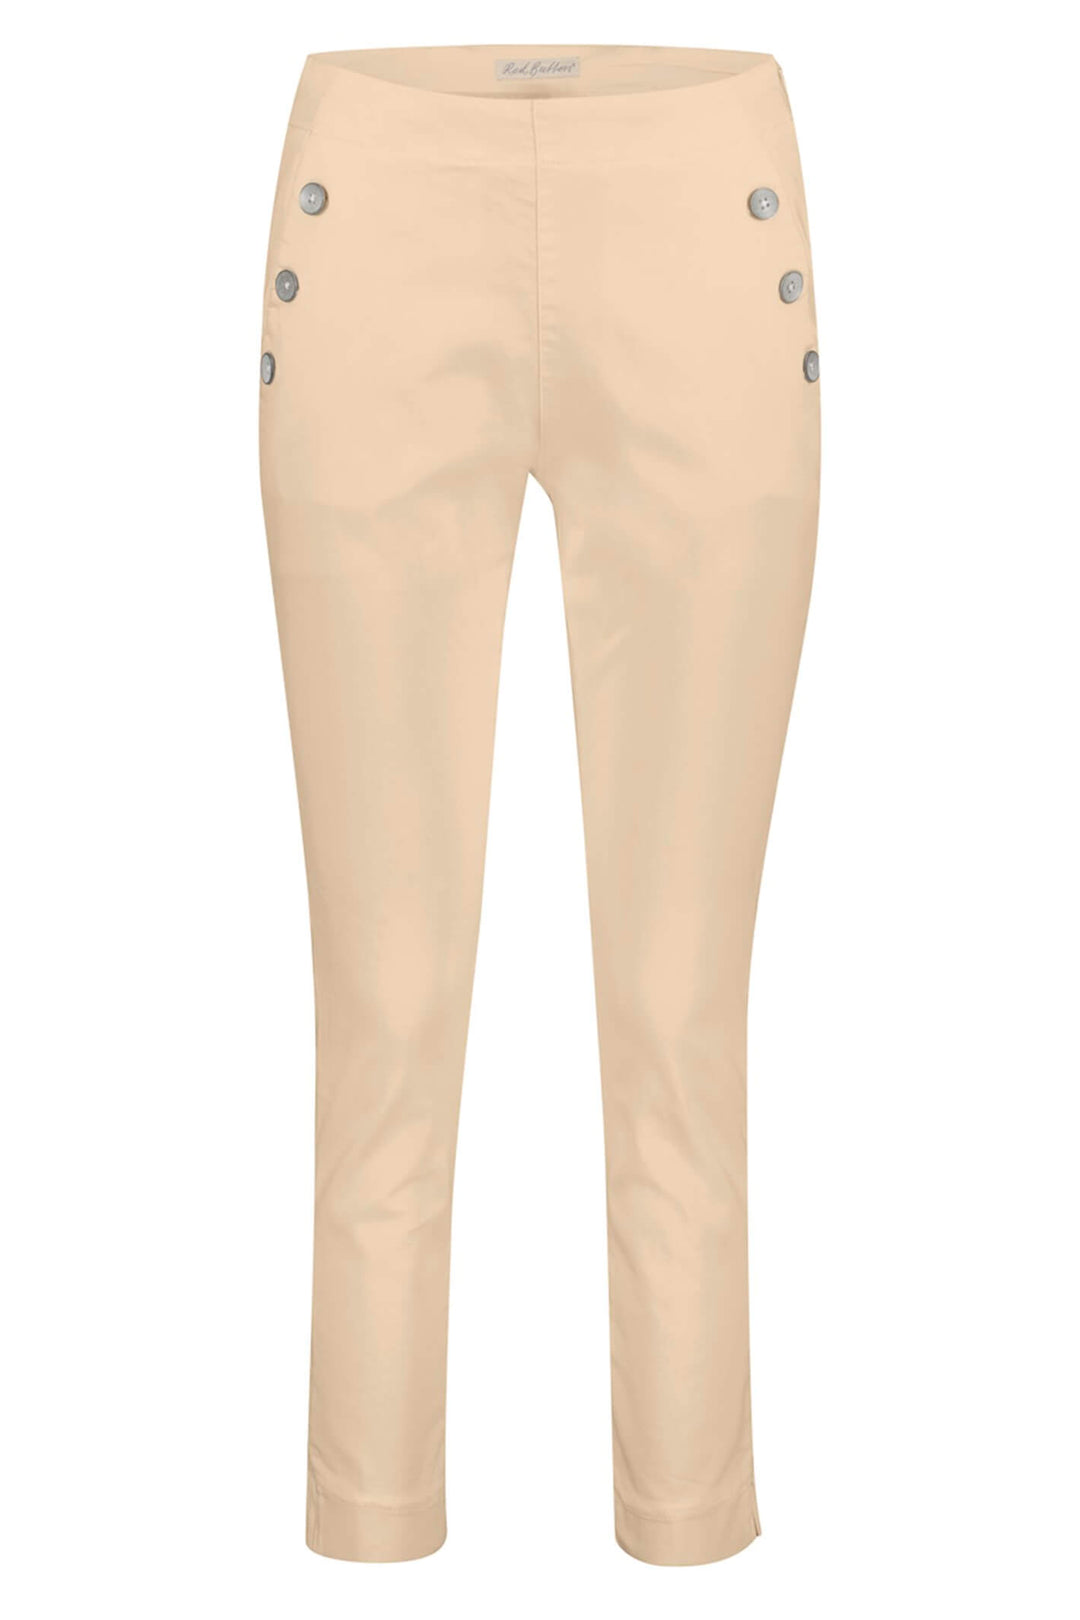 Red Button SRB3016 Bebe Sand Cropped Jog Trousers - Olivia Grace Fashion